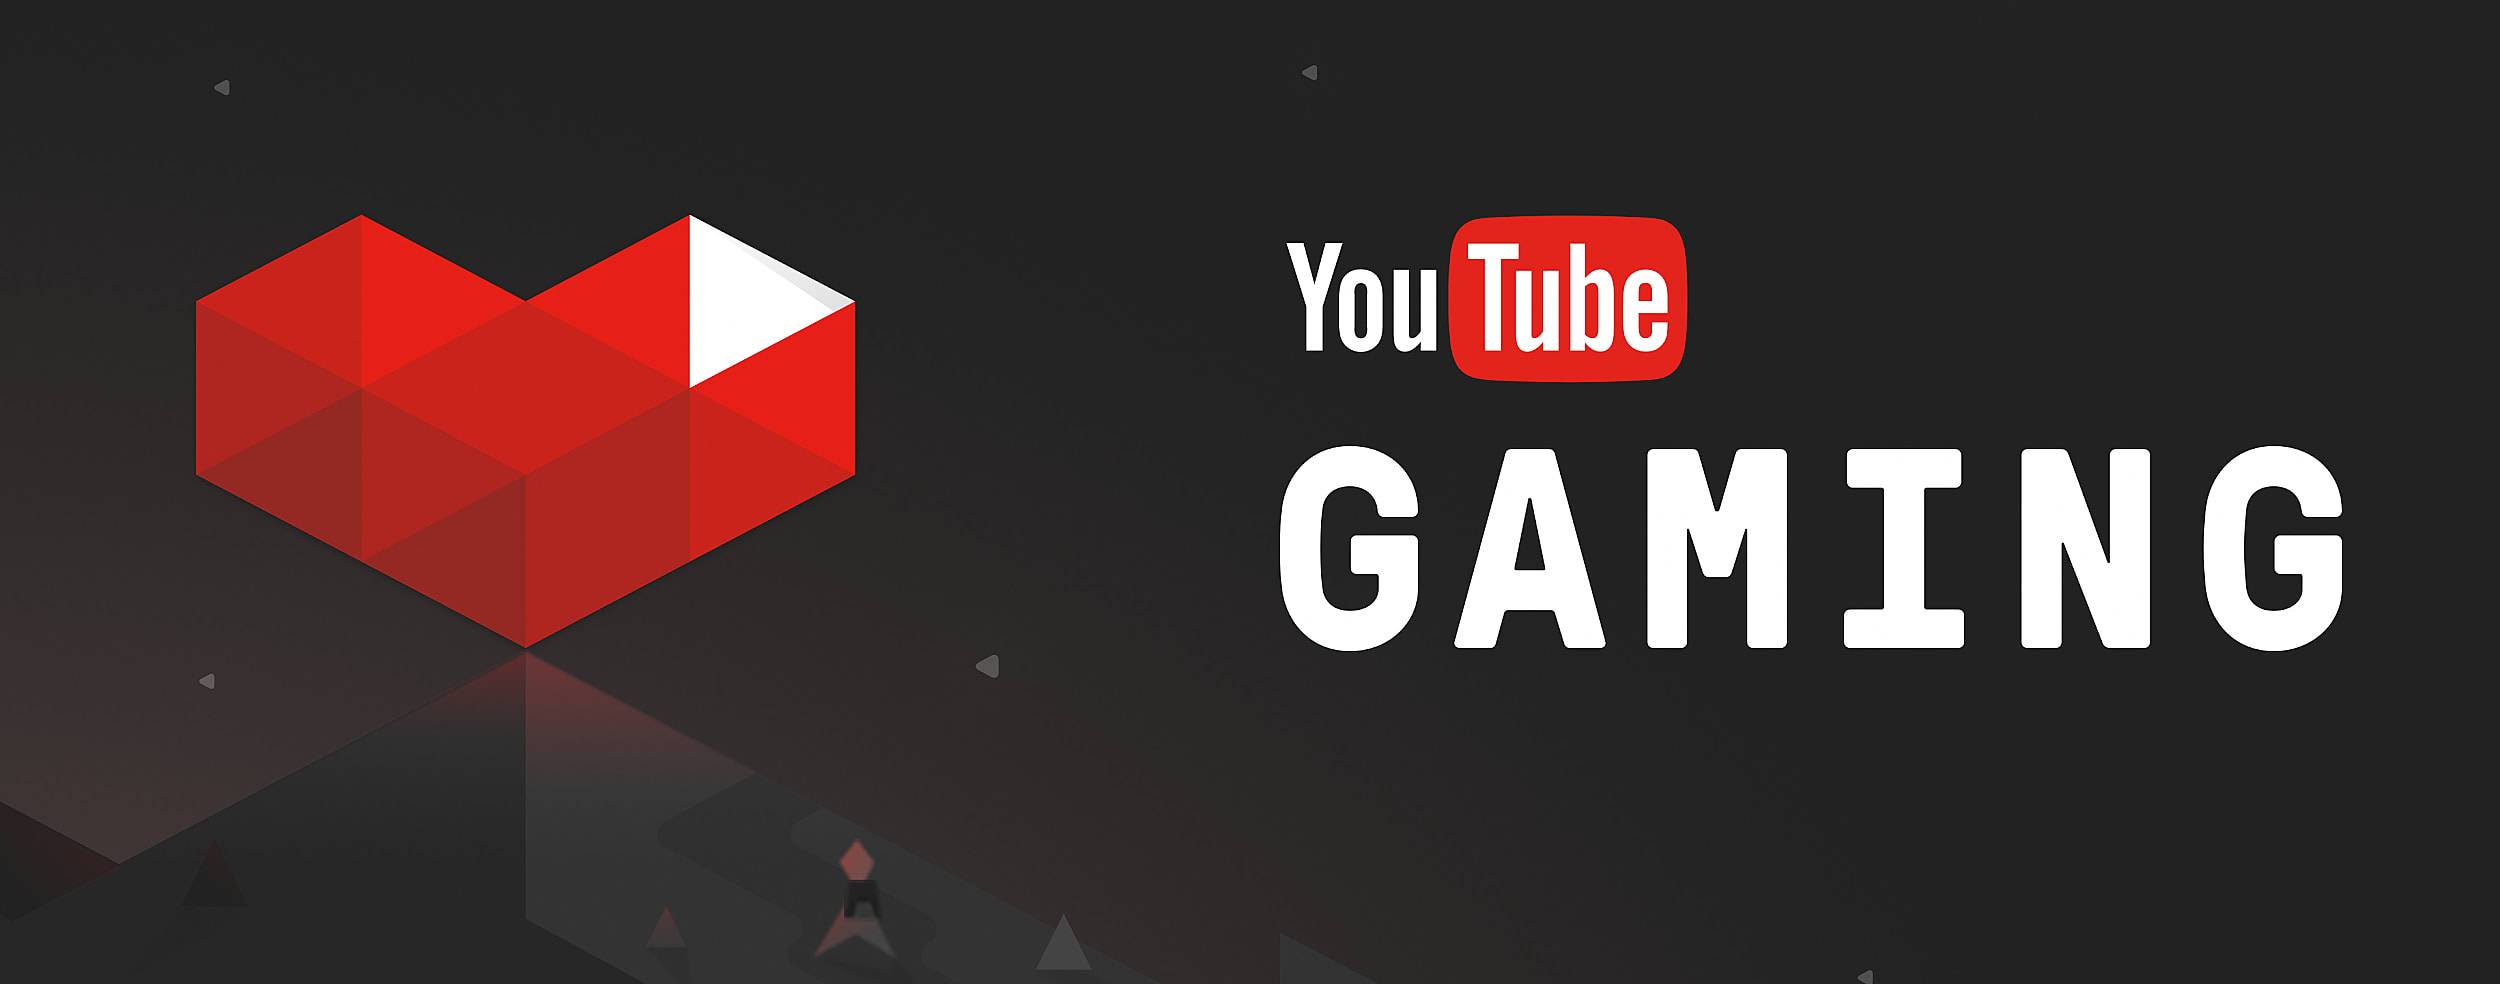 How to start a YouTube gaming channel